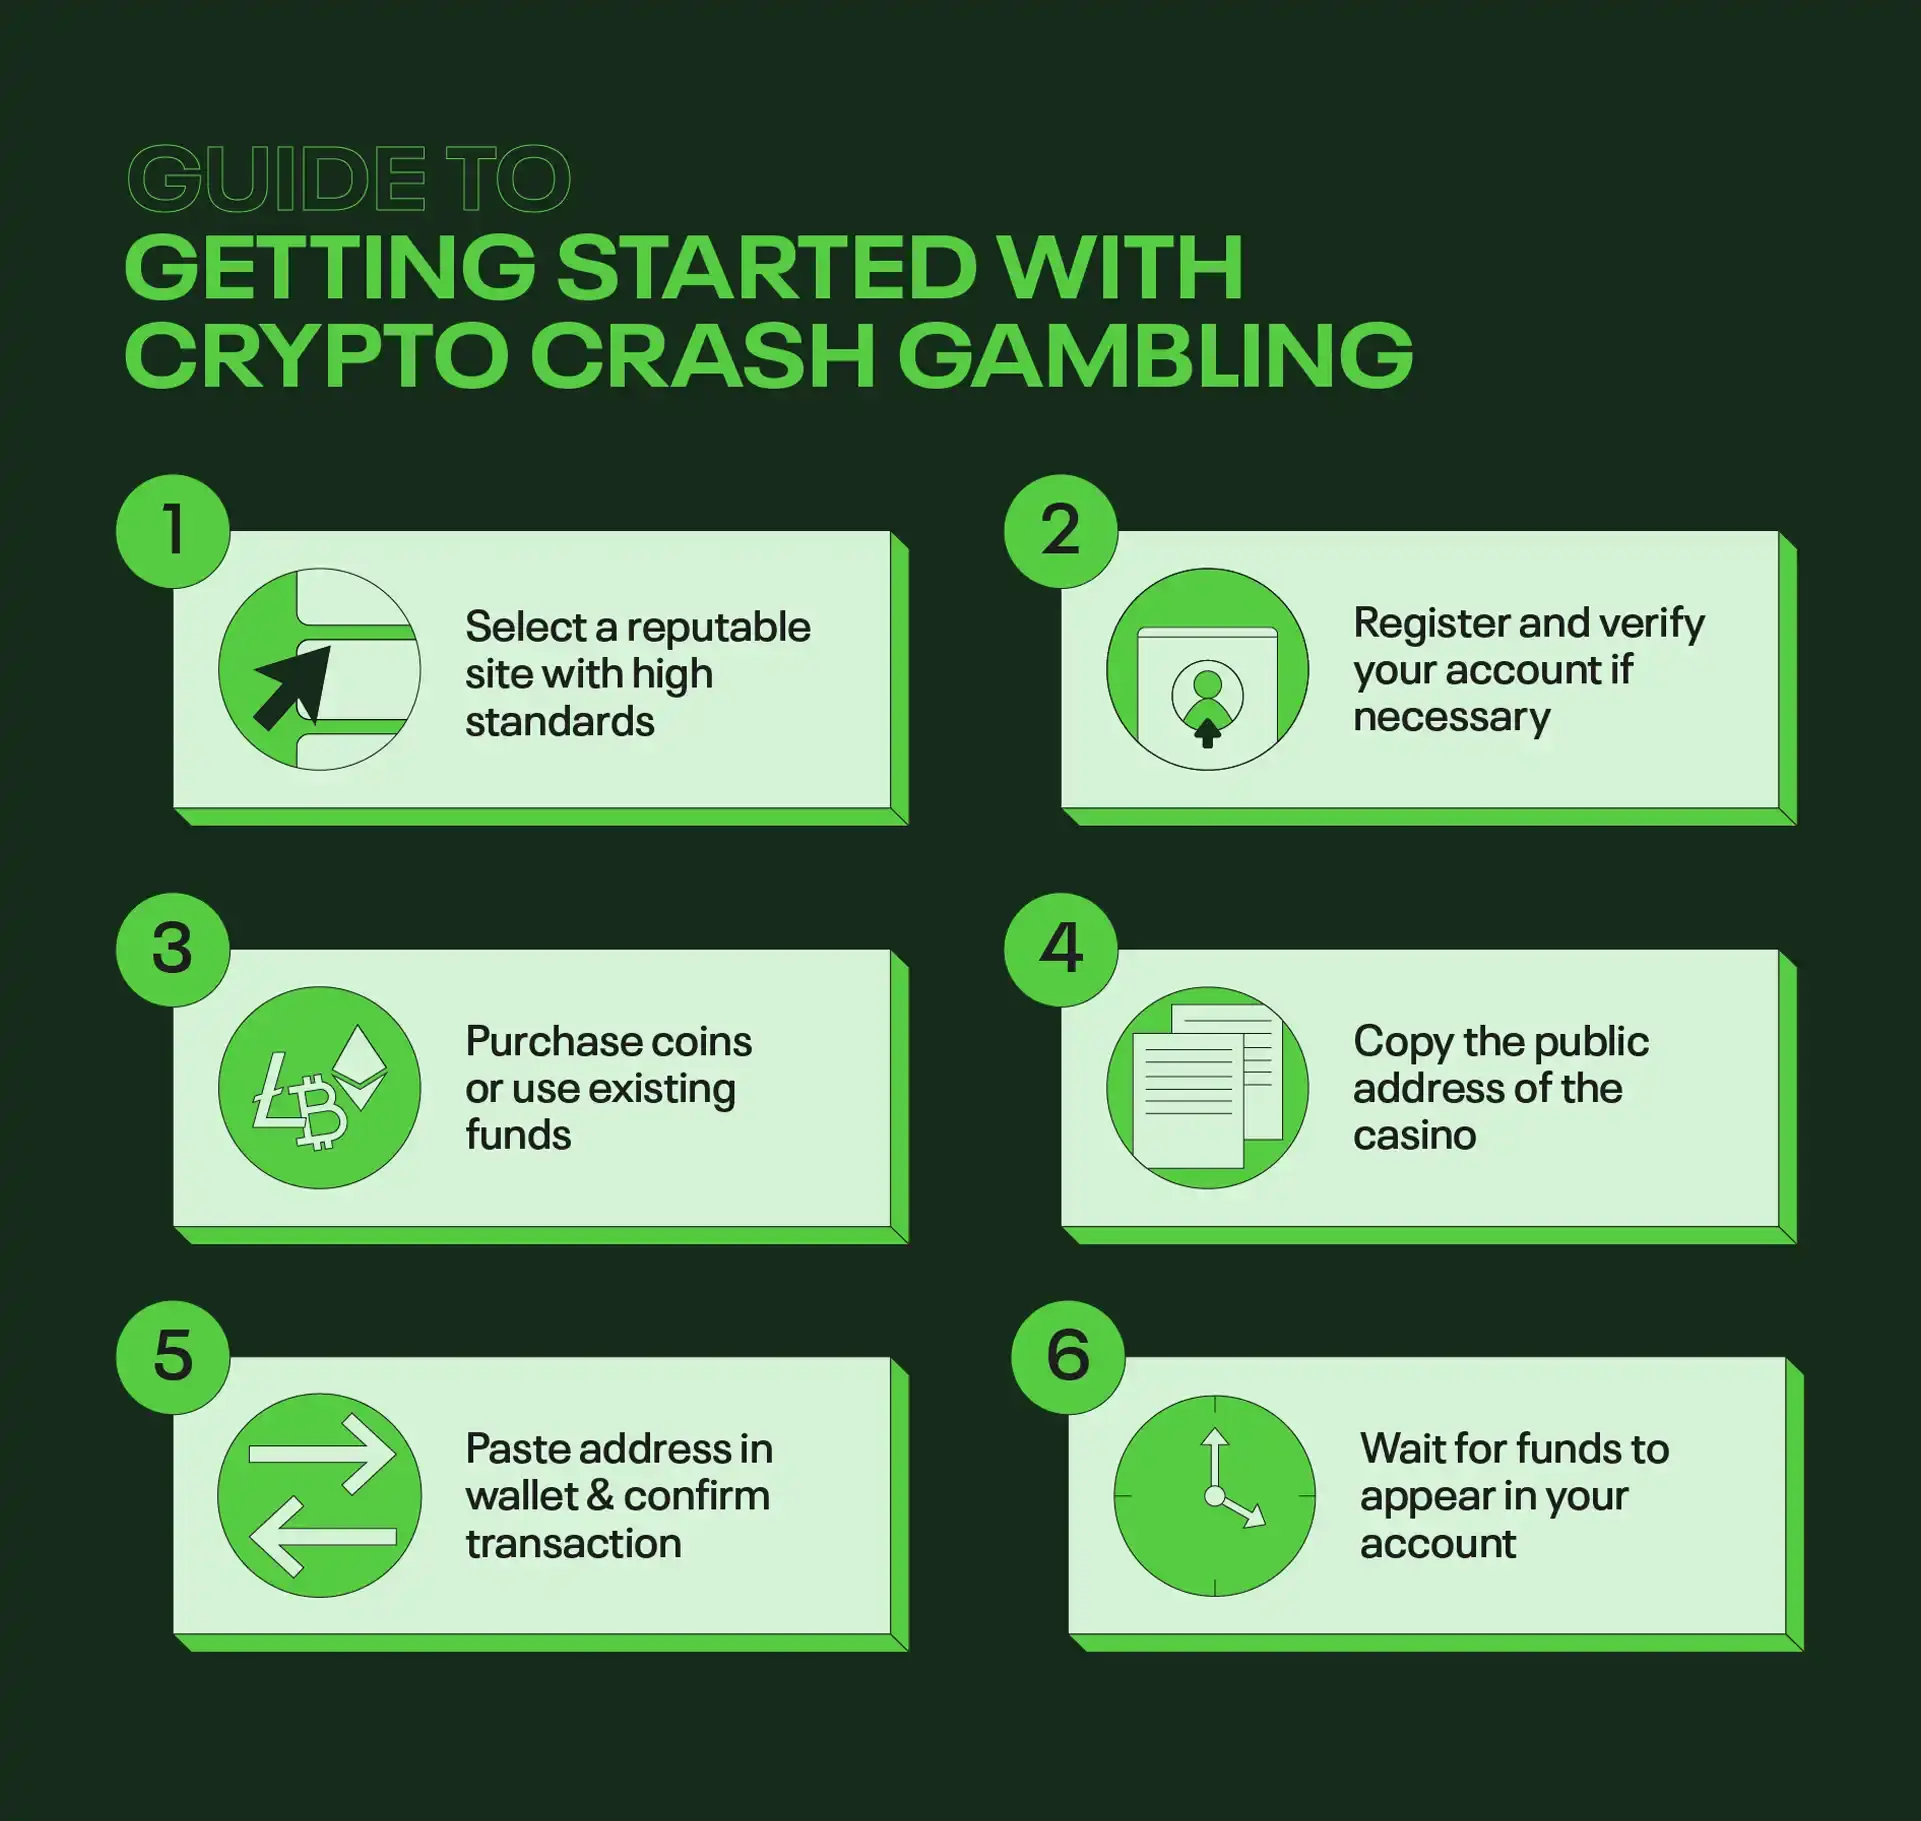 Guide to getting started with crypto crash gambling